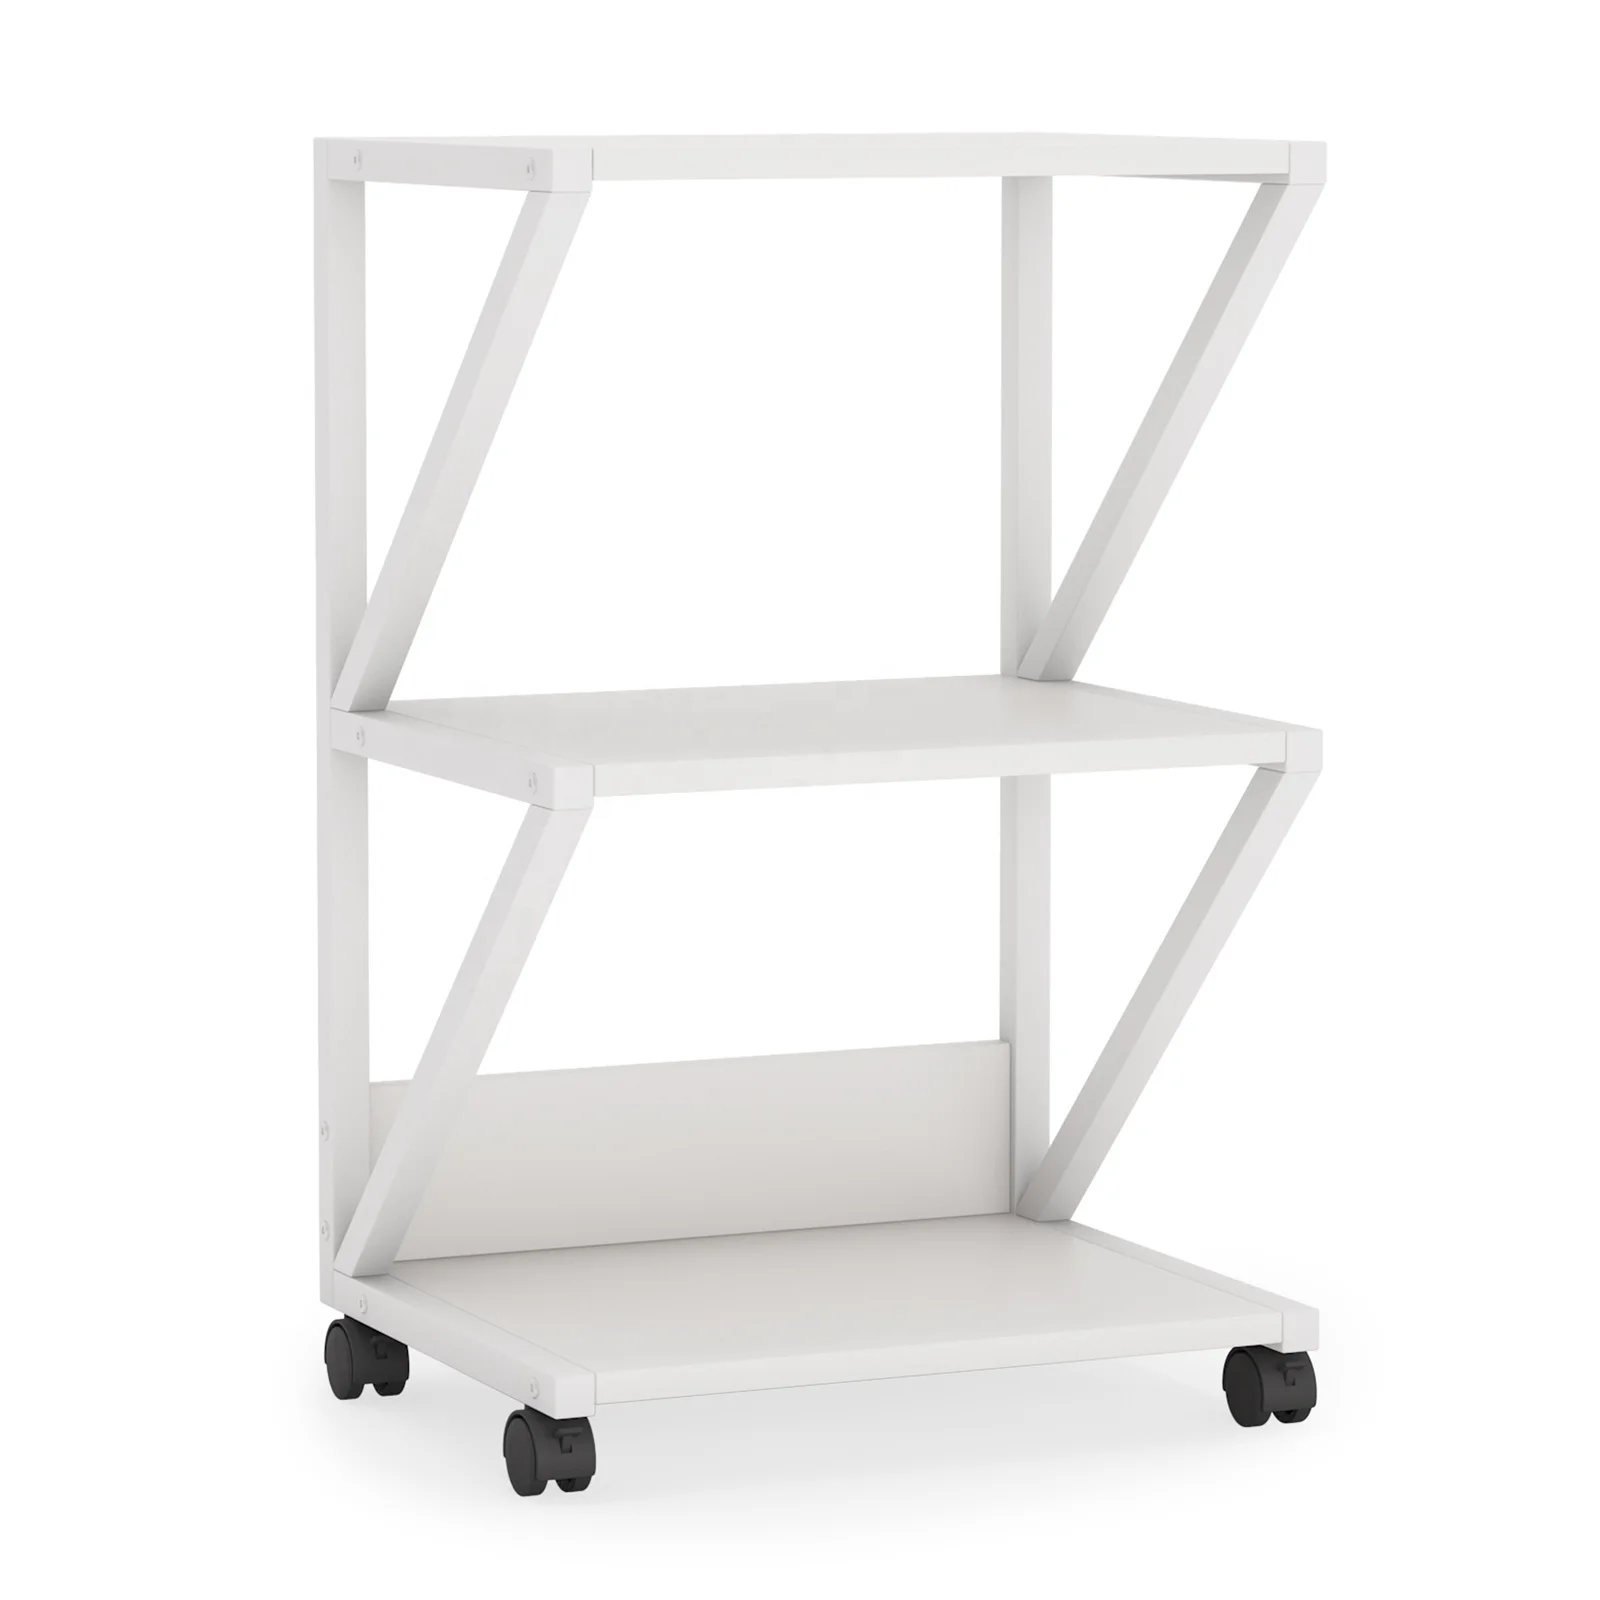 Tribesigns Printer Stand Industrial 3-Tier Rolling Printer Cart Shelf Storage on Wheels for Home Office